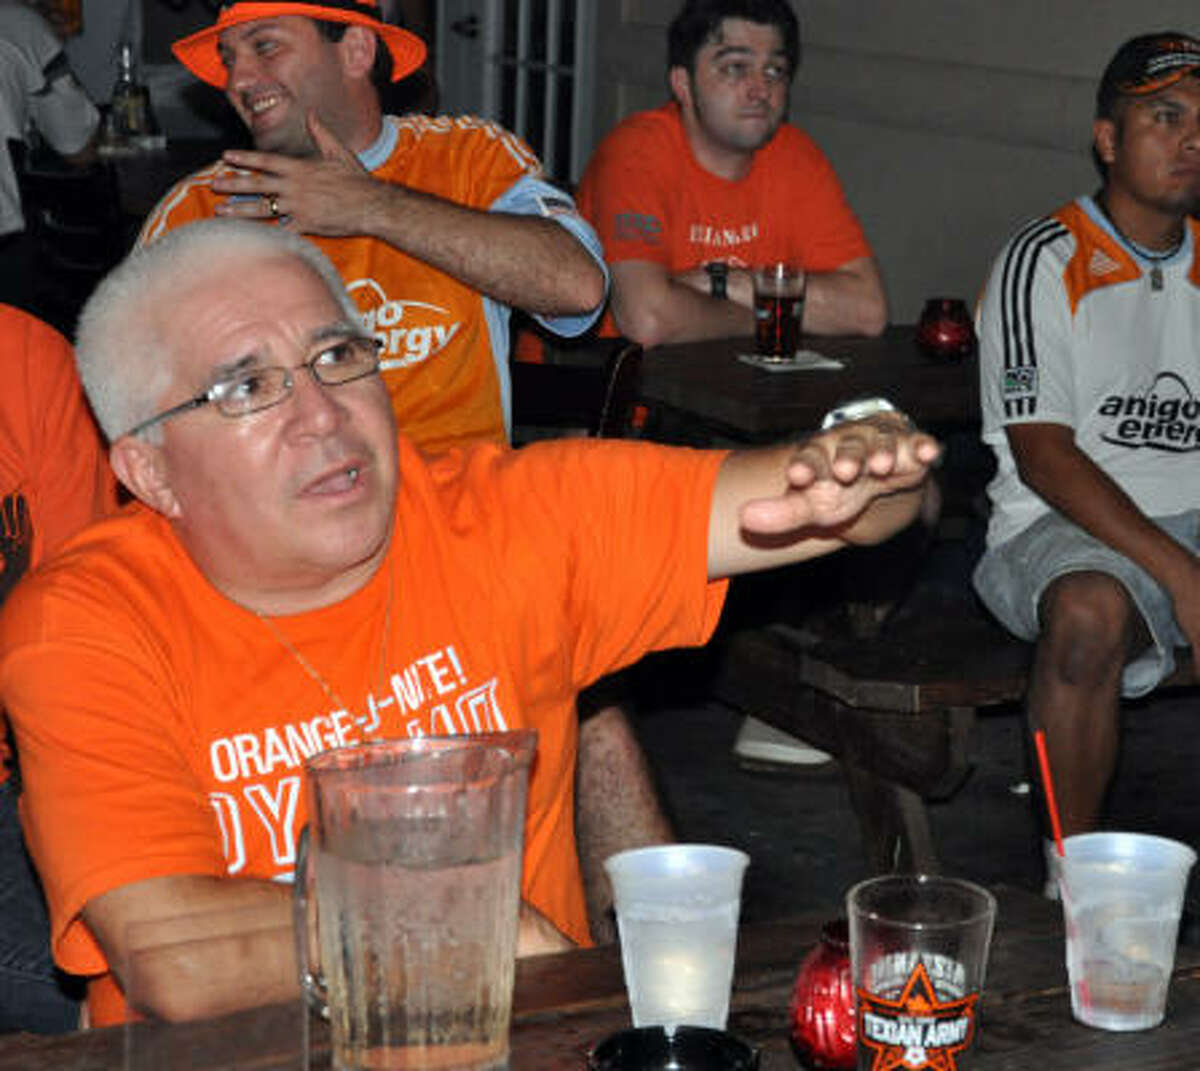 Donald Buckholt discusses the game with friend Andy Jackson. Members of the Texian Army gather at the Mezzanine Lounge to watch the away game.